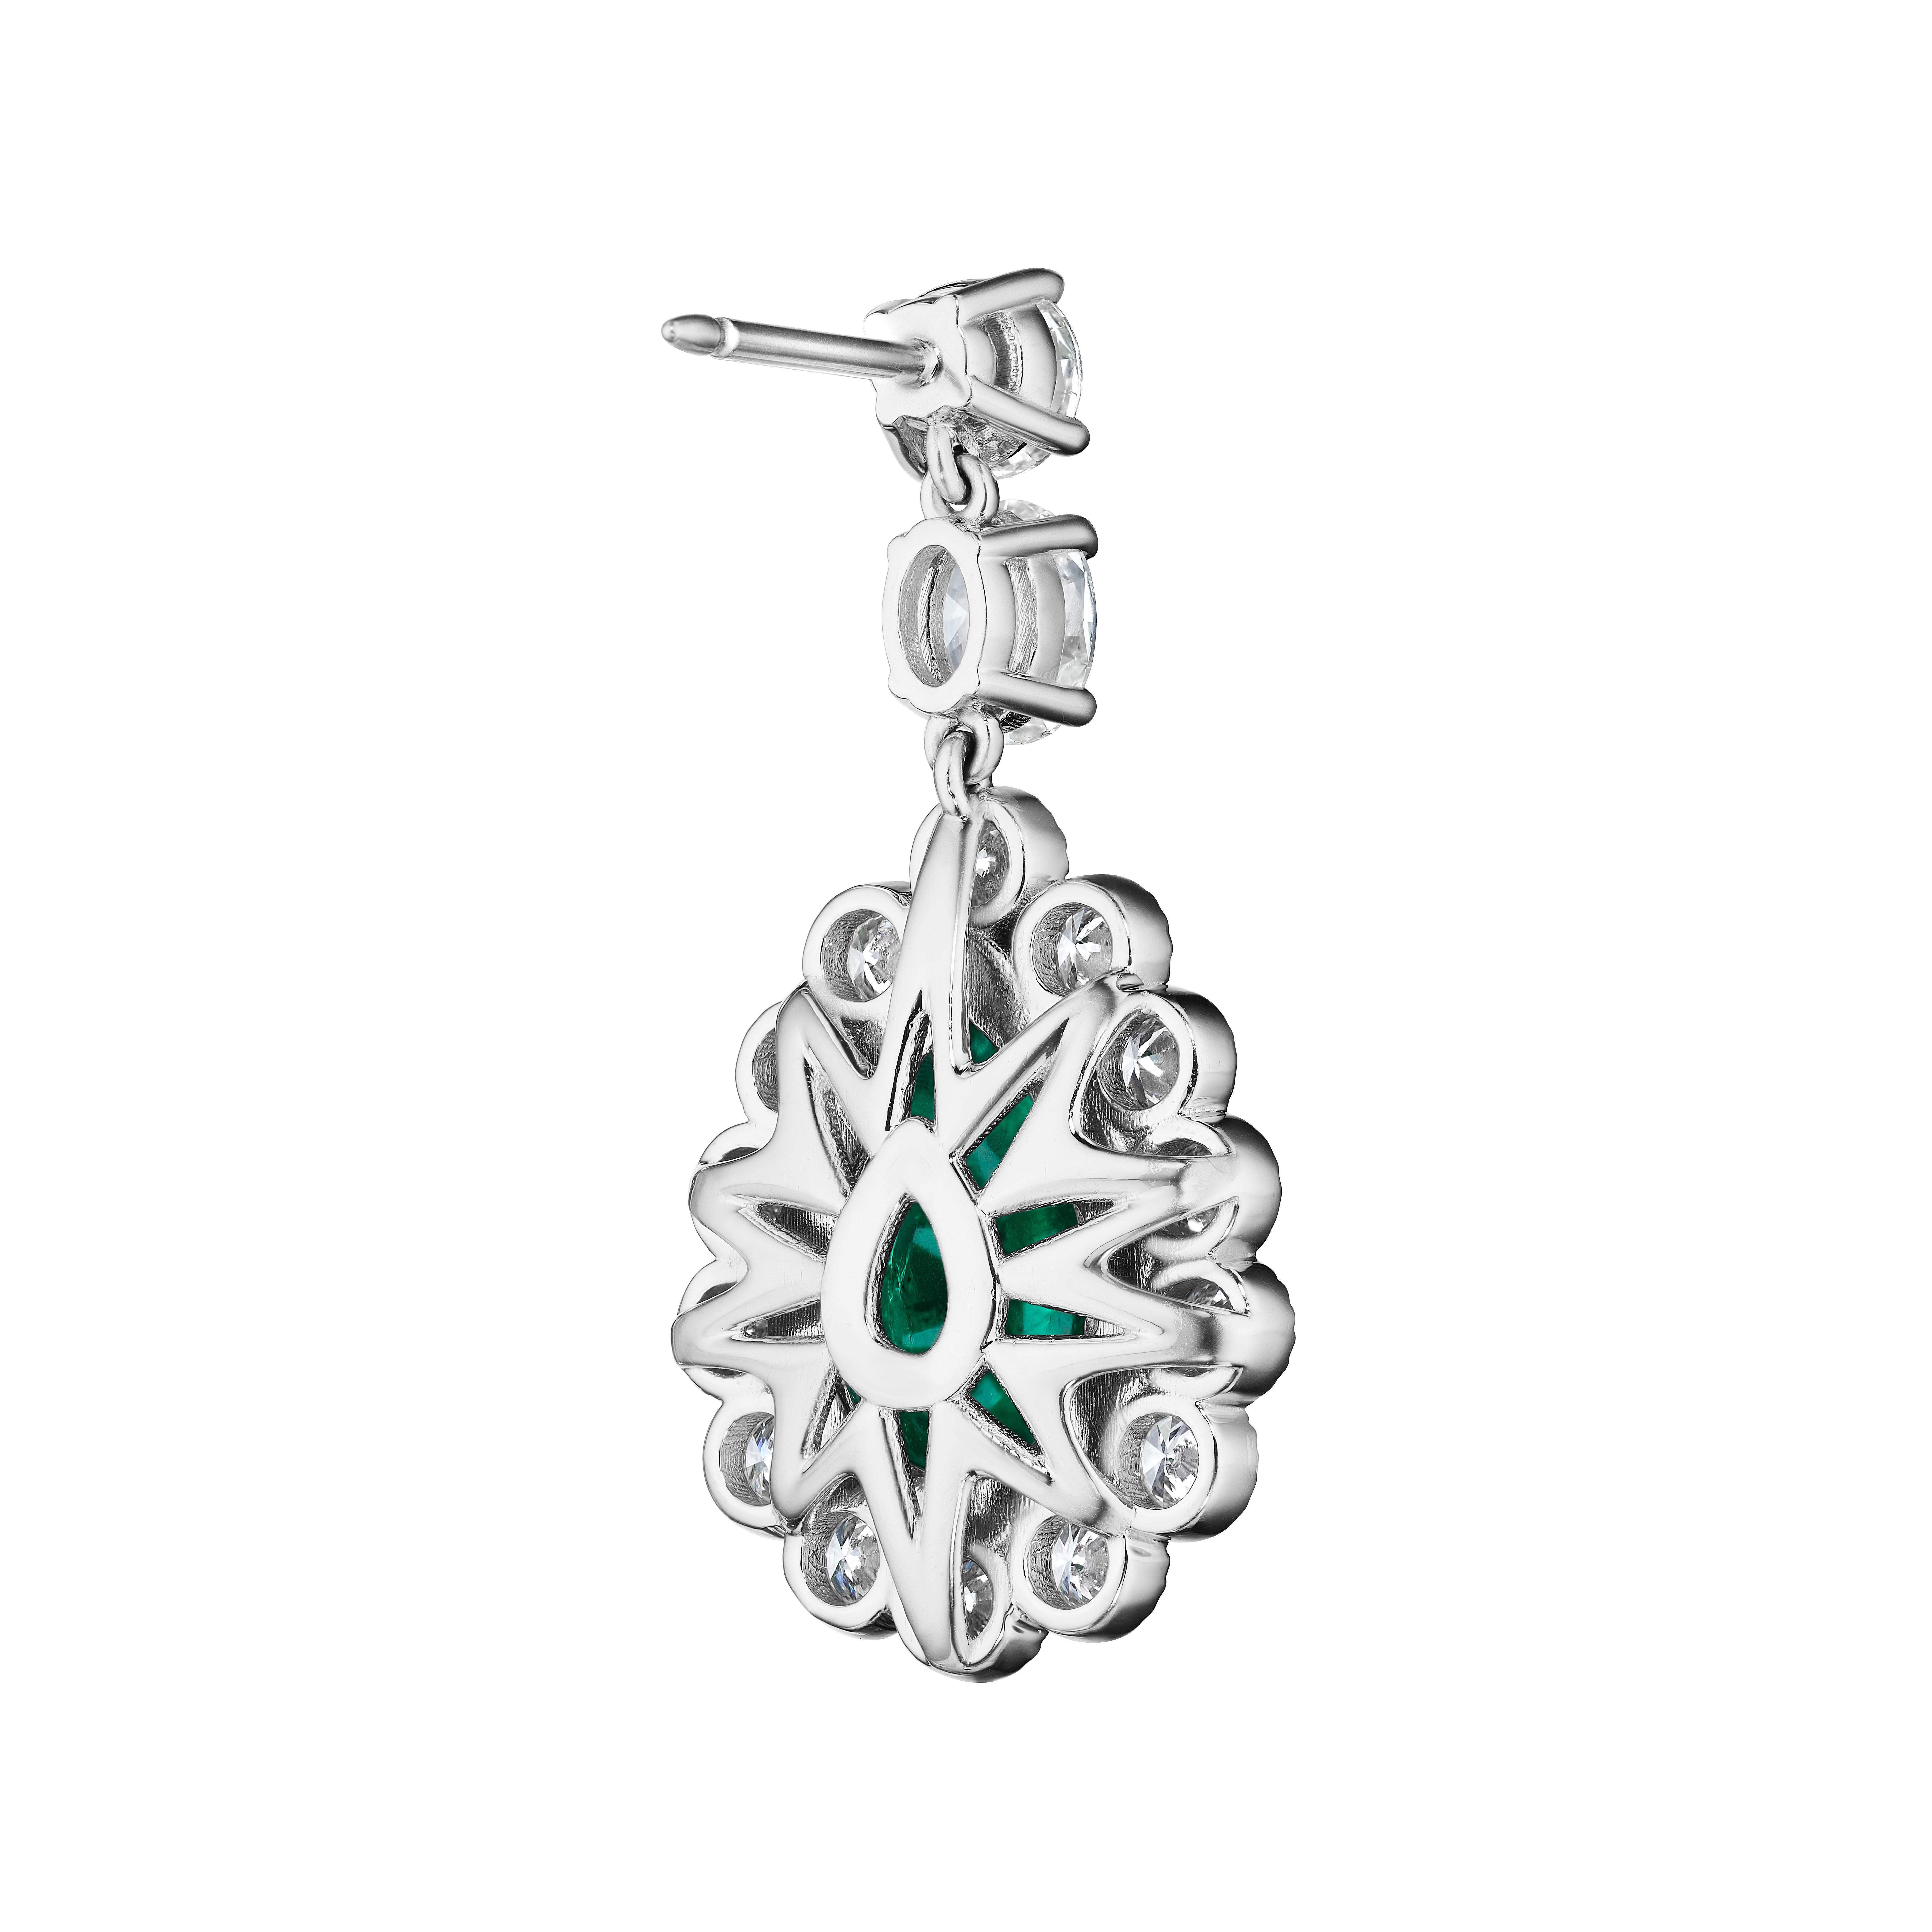 Pear Cut 9.67ct Pear Shape Cabochon Emerald & Diamond Earrings in 18KT White Gold For Sale